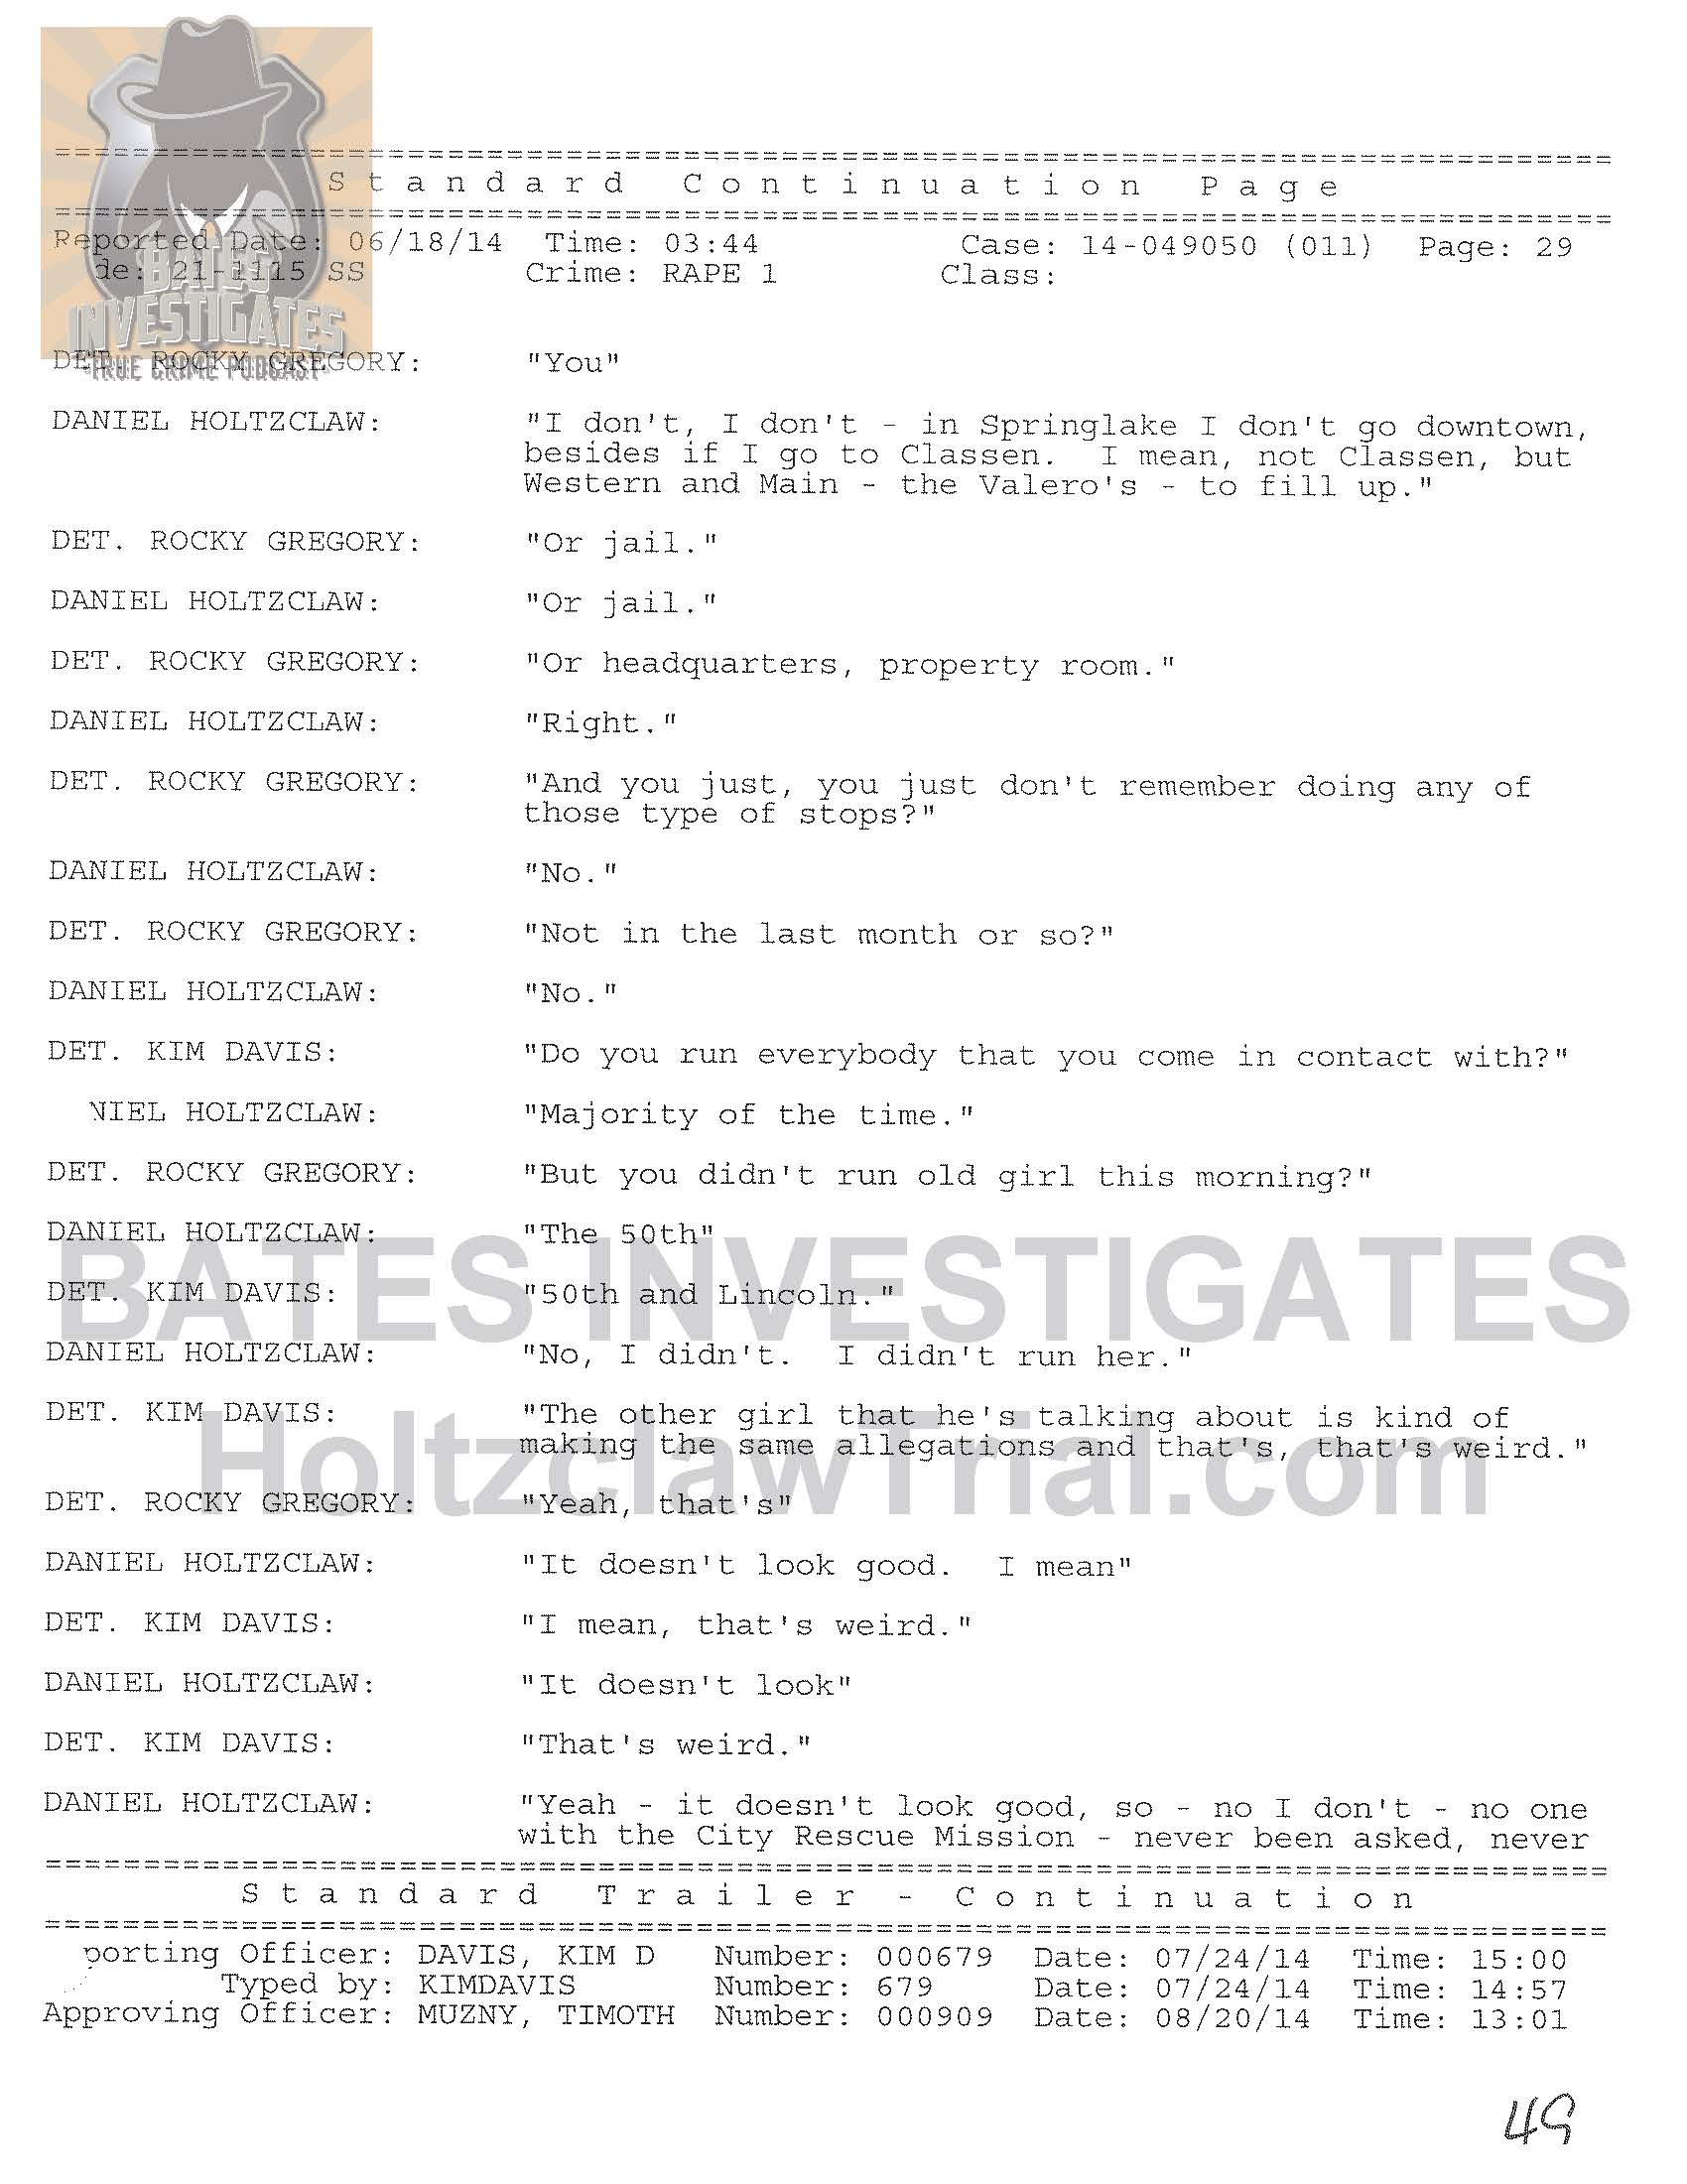 Holtzclaw Interrogation Transcript - Ep02 Redacted_Page_29.jpg